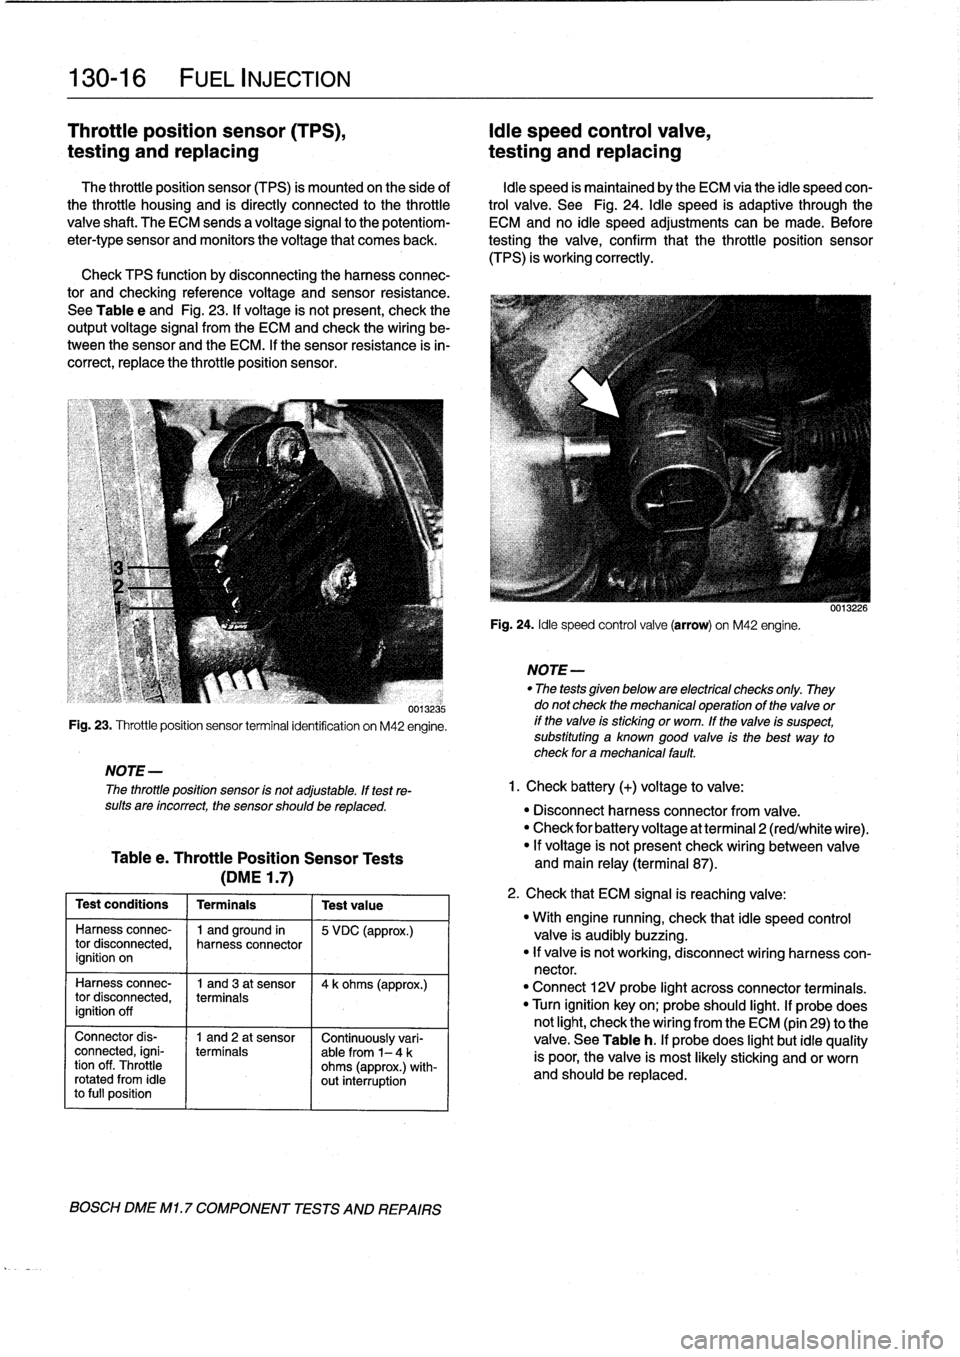 BMW 323i 1995 E36 Owners Manual 
130-
1
6

	

FUEL
INJECTION

Throttie
position
sensor
(TPS),

	

Idie
speed
control
valve,
testing
and
replacing

	

testing
and
replacing

The
throttie
position
sensor
(TPS)
is
mounted
on
the
side
o